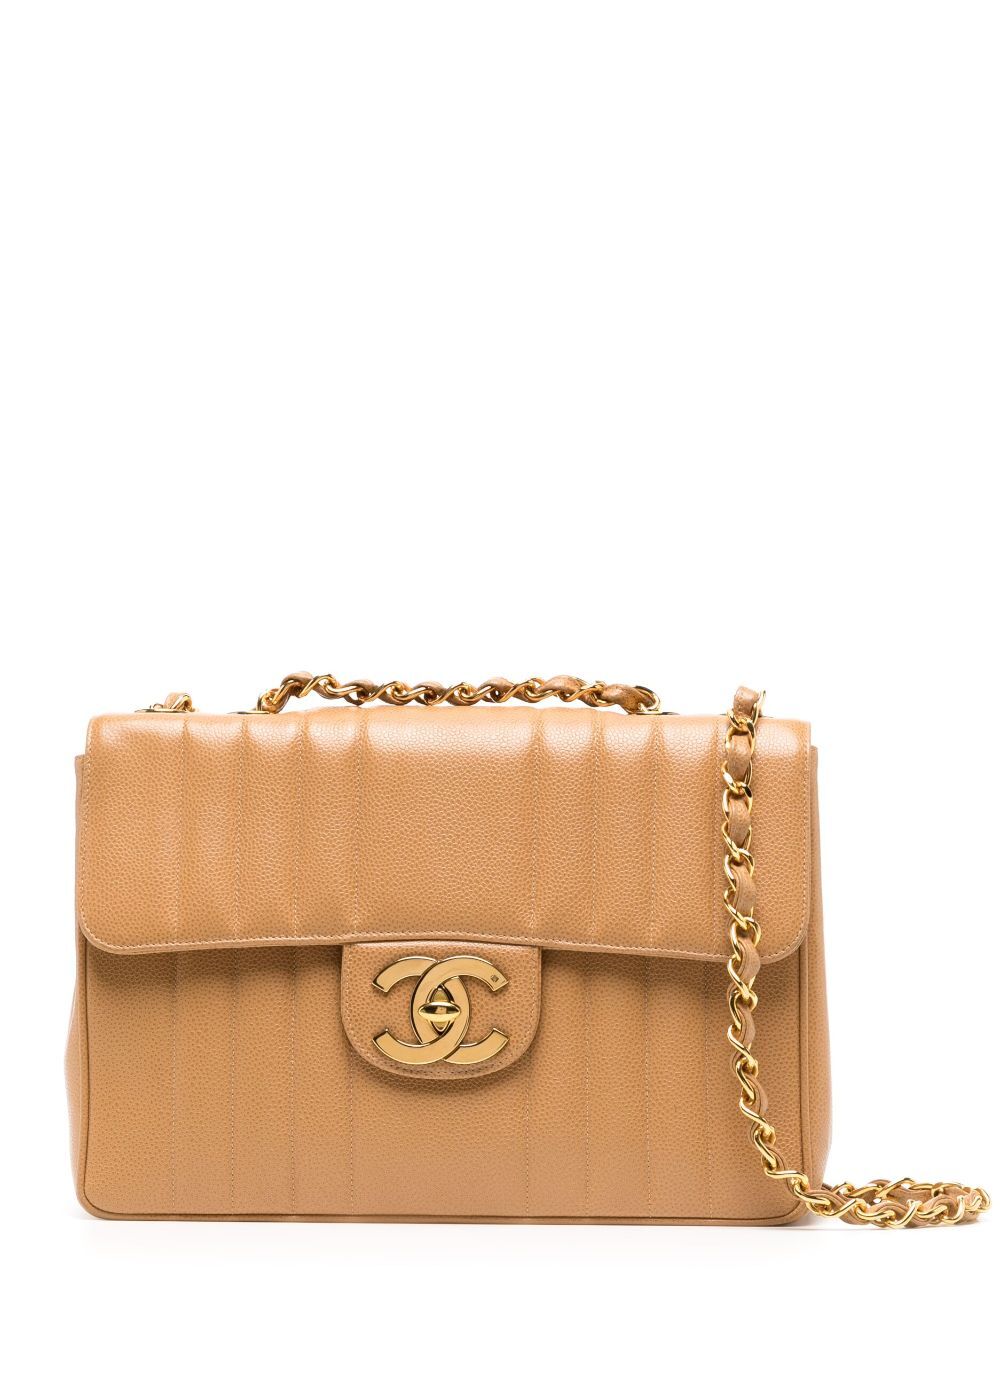 CHANEL Pre-Owned 1992 Jumbo Mademoiselle Classic Flap shoulder bag - Neutrals